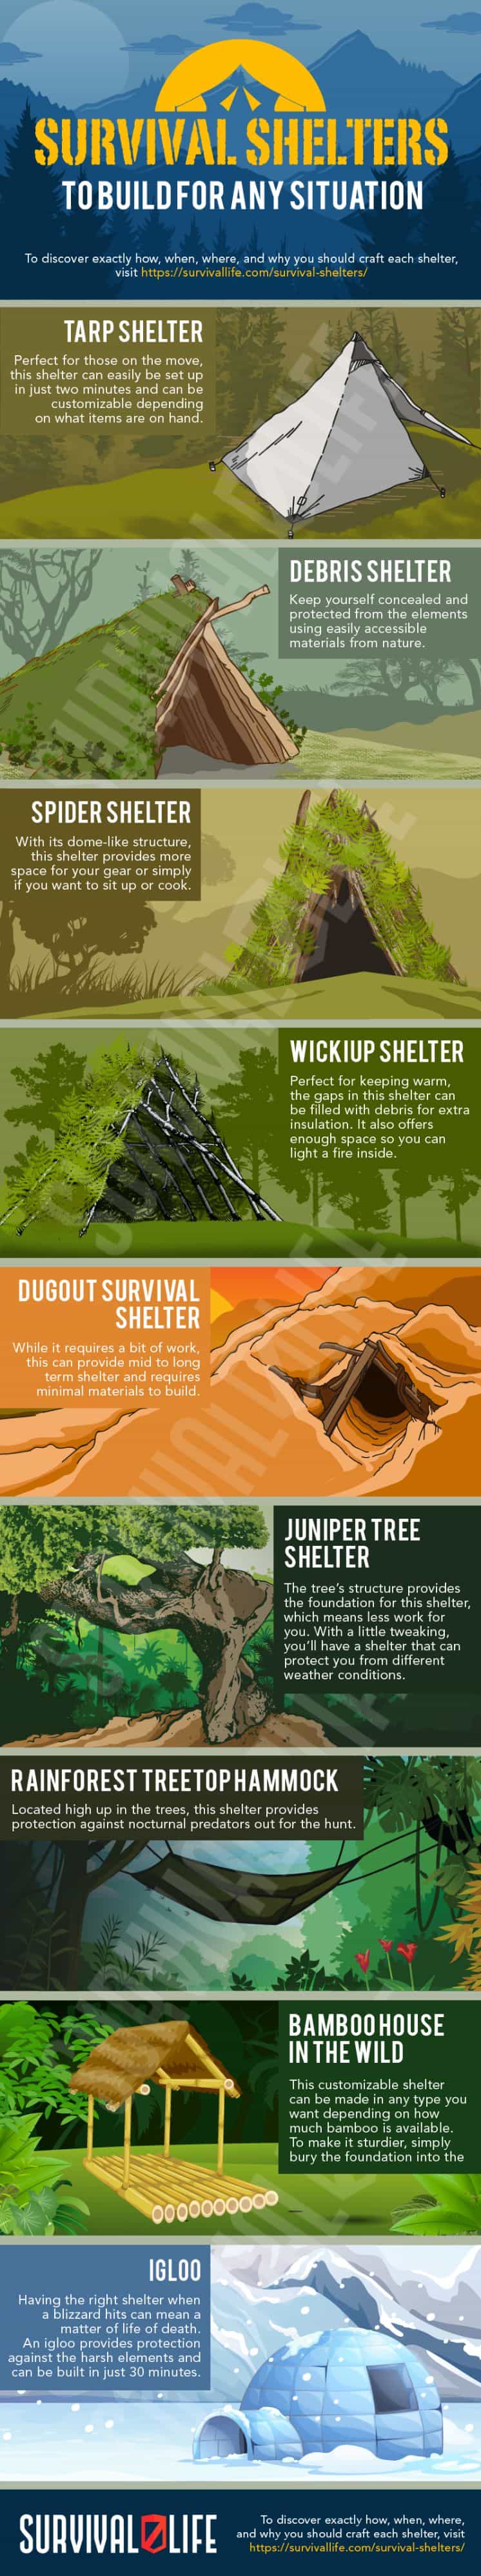 Infographic | How To Build DIY Survival Shelters To Survive Through The Night